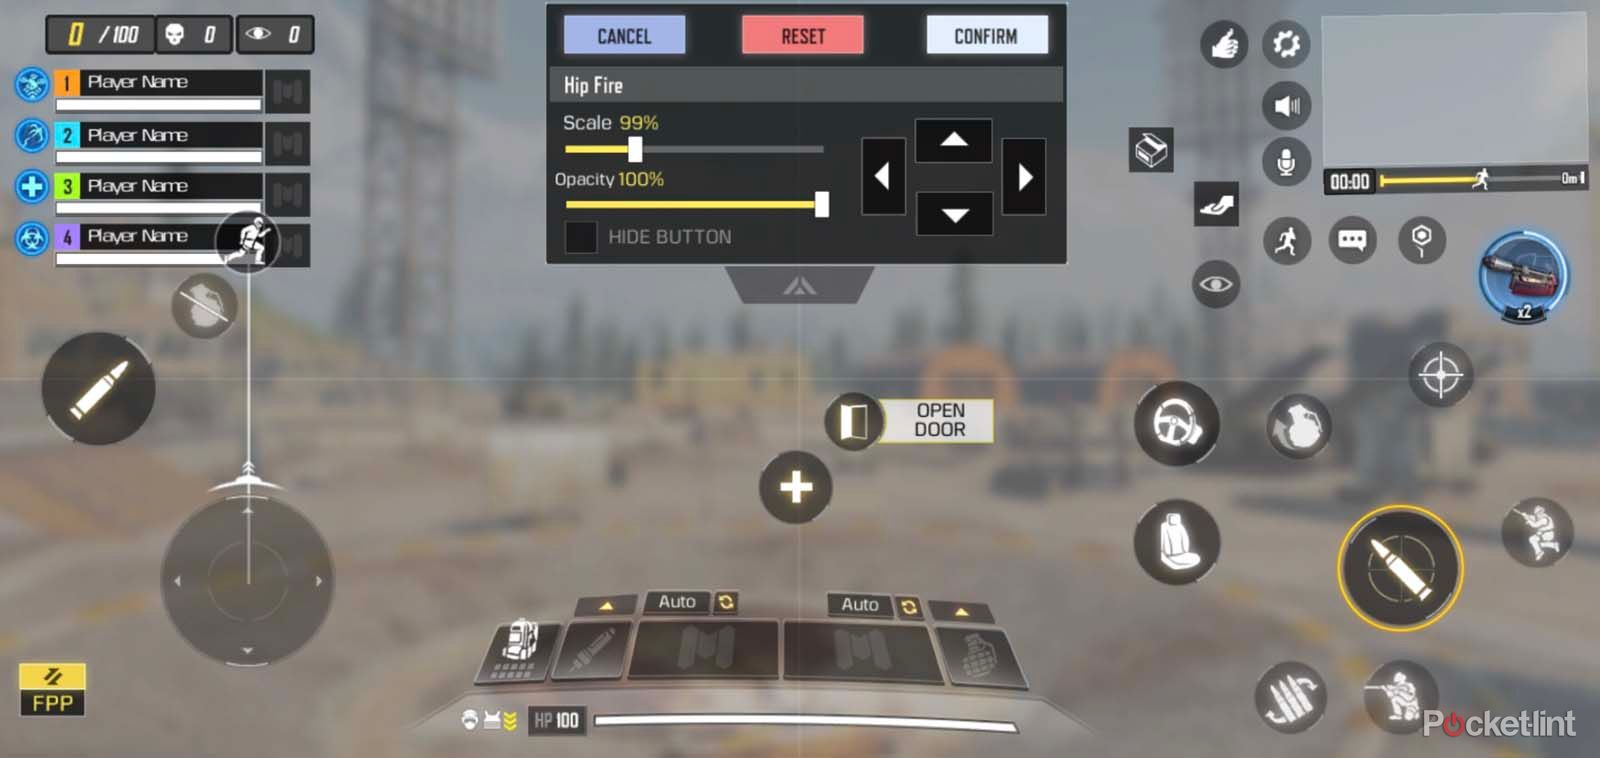 Call of duty mobile screens image 2